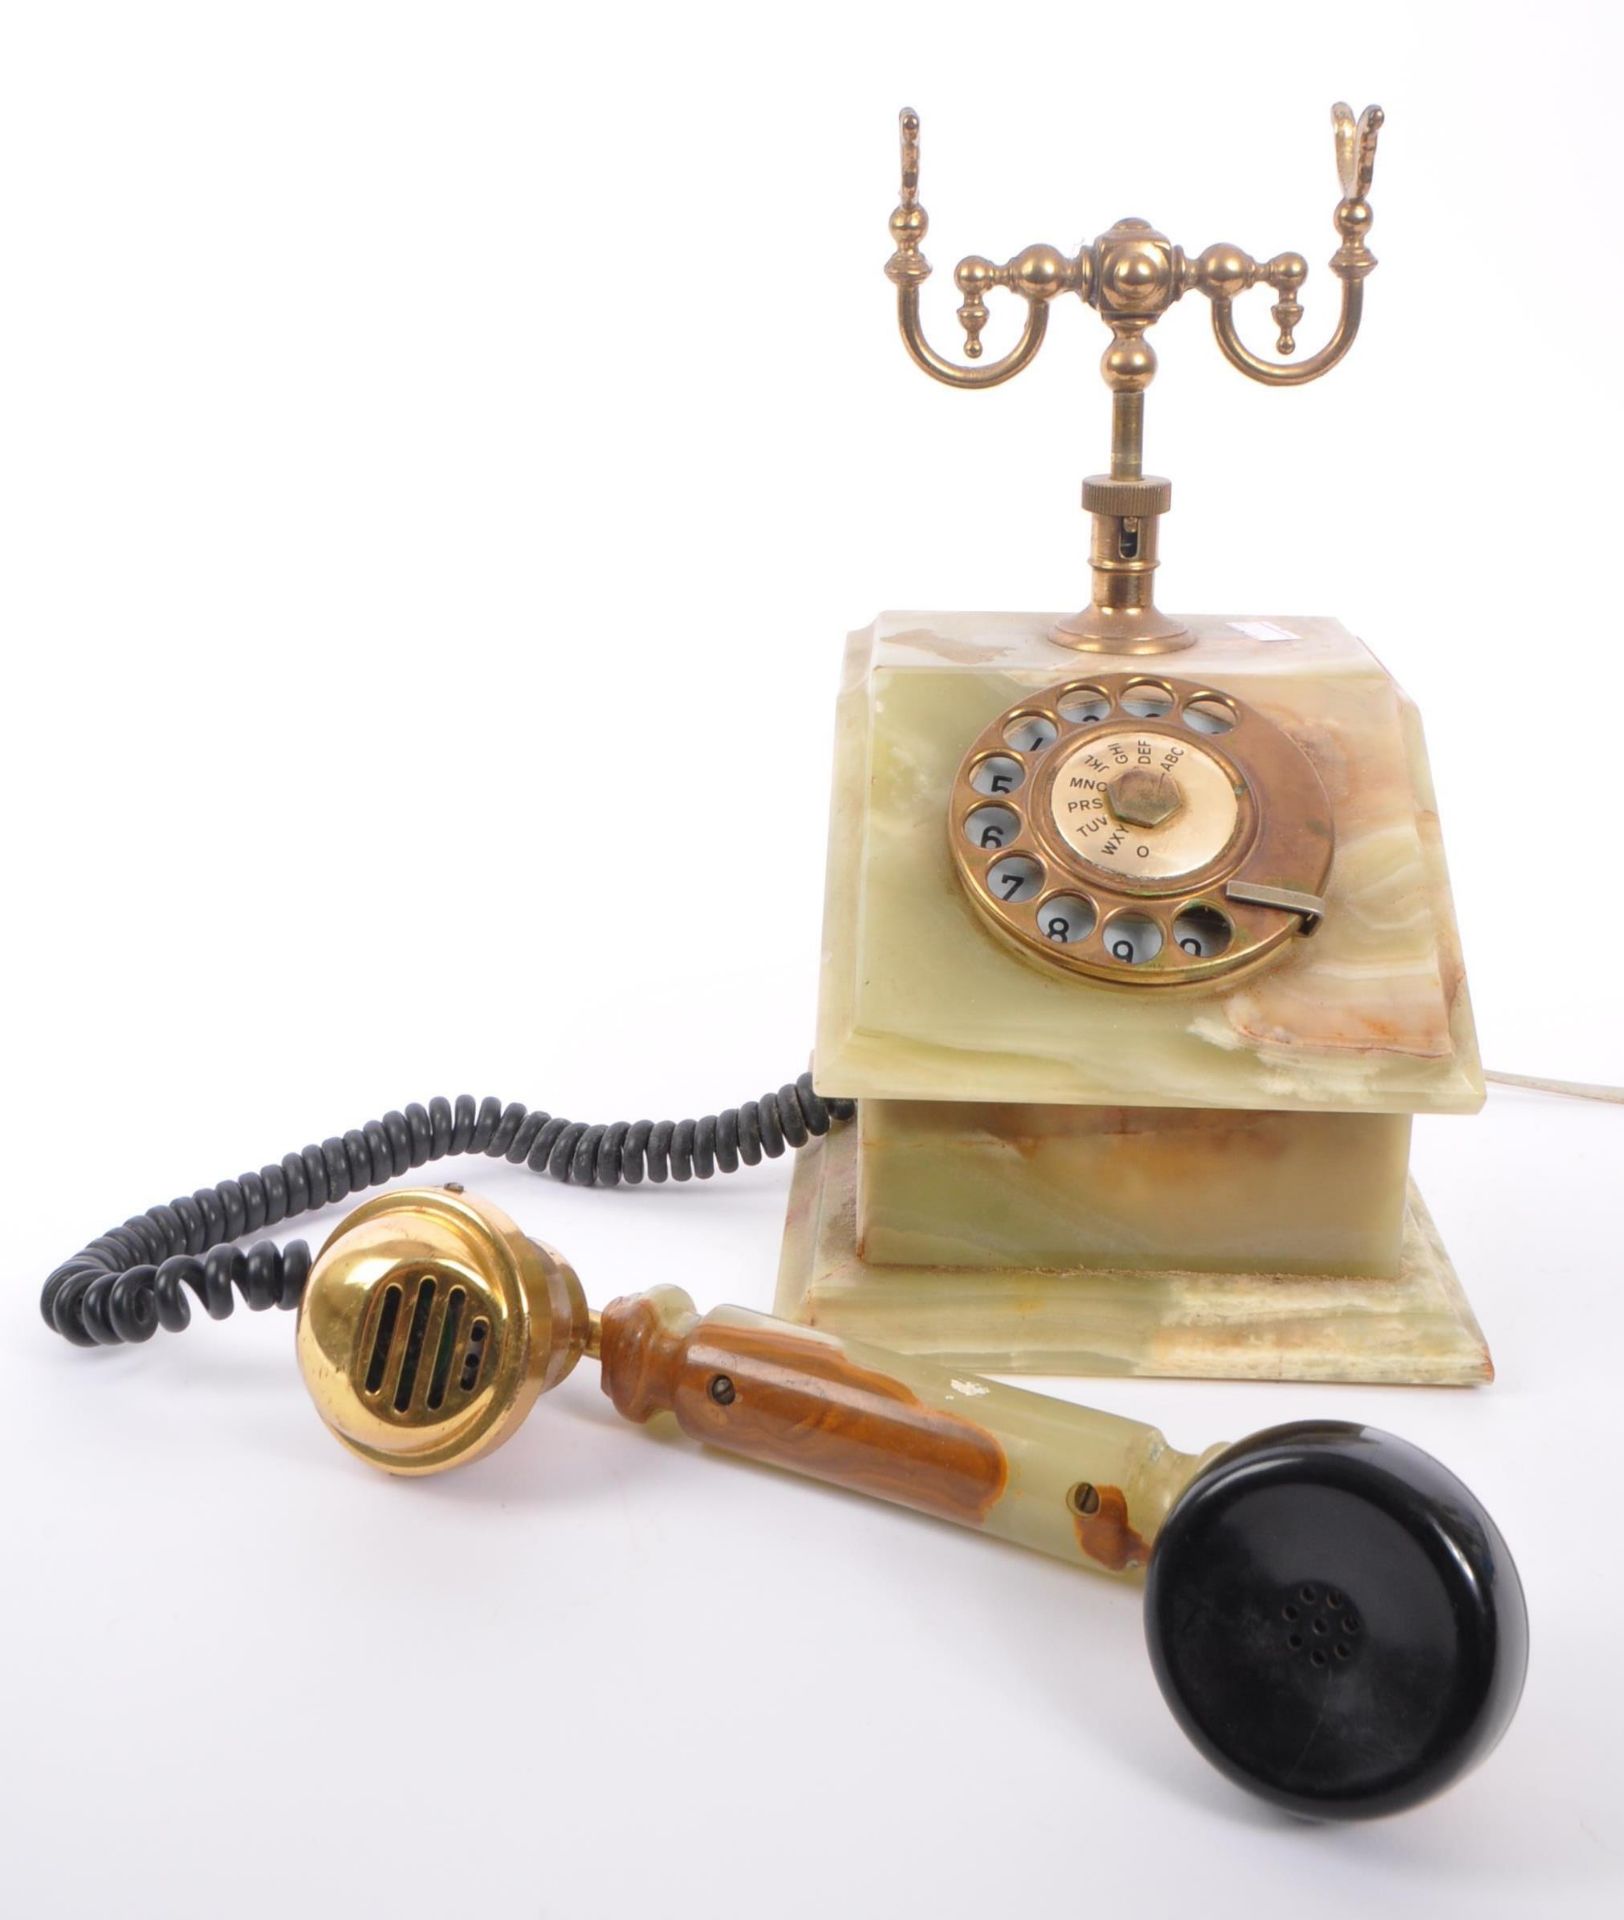 VINTAGE CIRCA. 1930S ONYX AND BRASS ROTARY DIAL TELEPHONE - Image 5 of 6